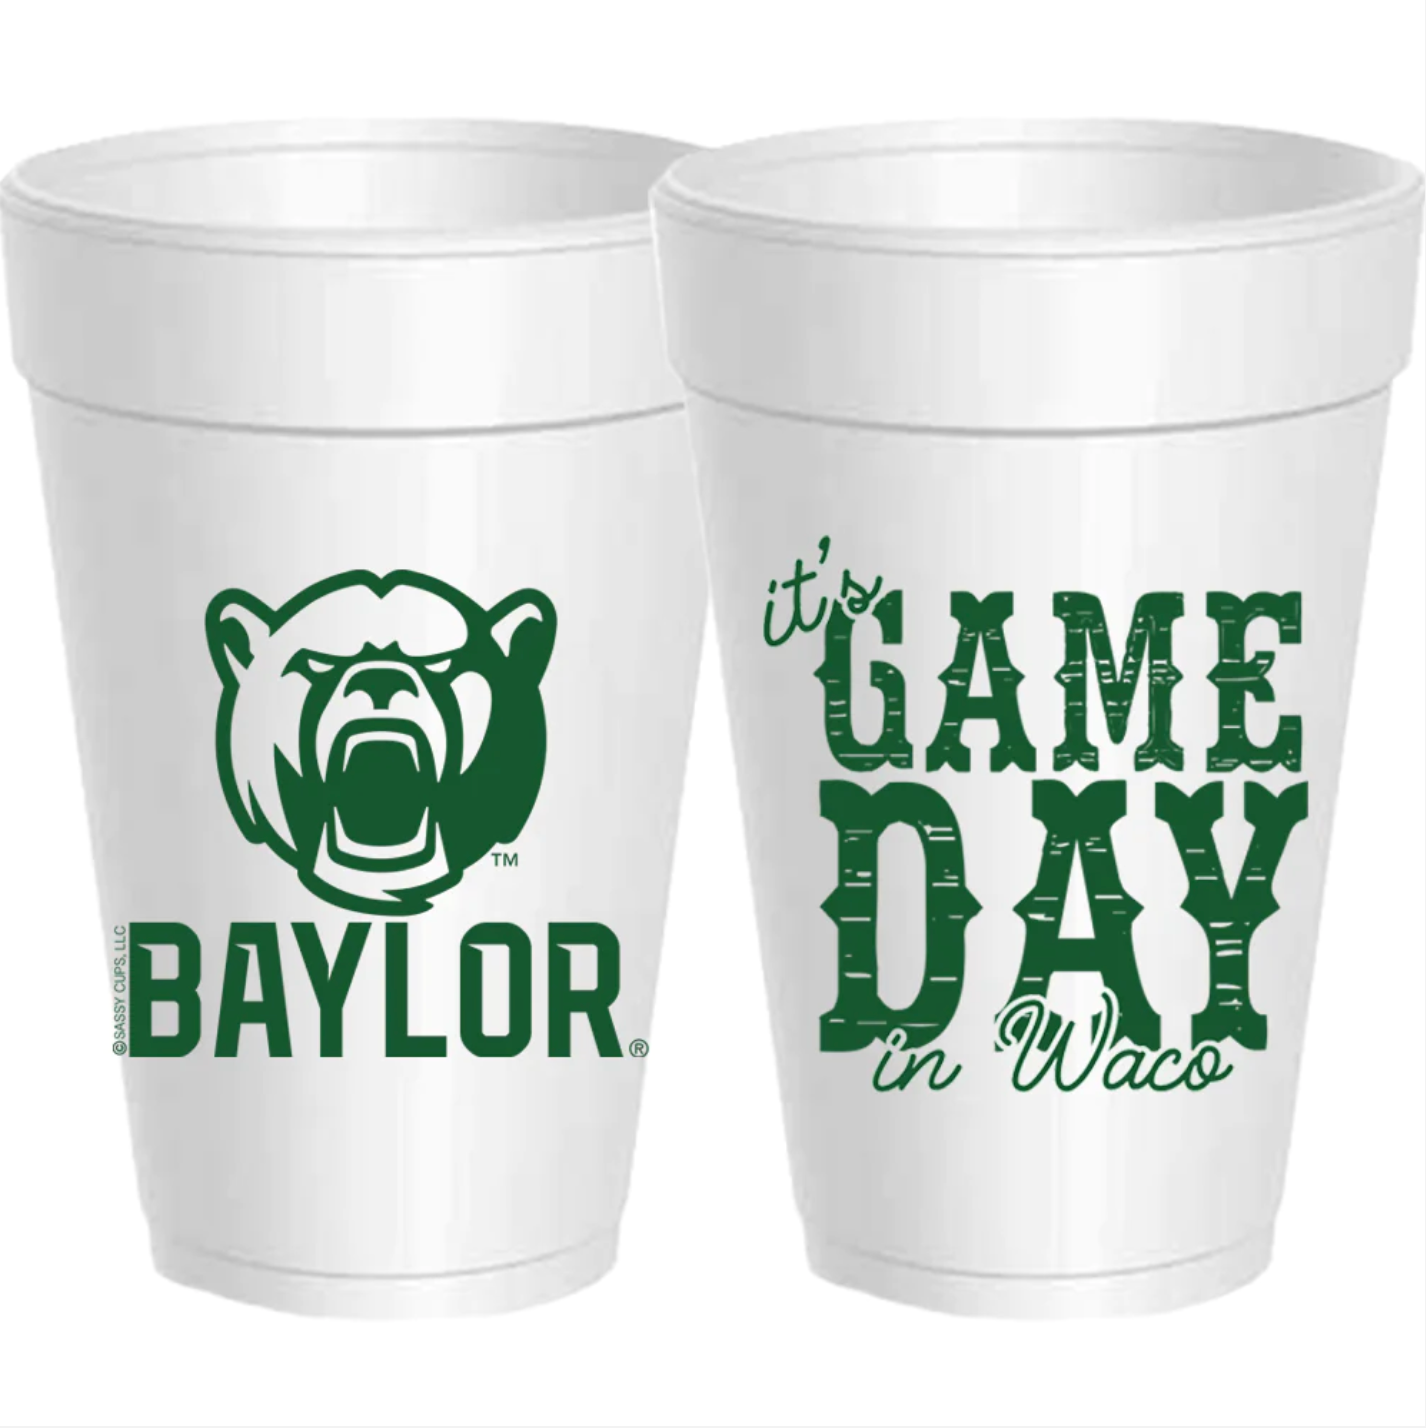 Baylor- Game Day in Waco Styrofoam Cups